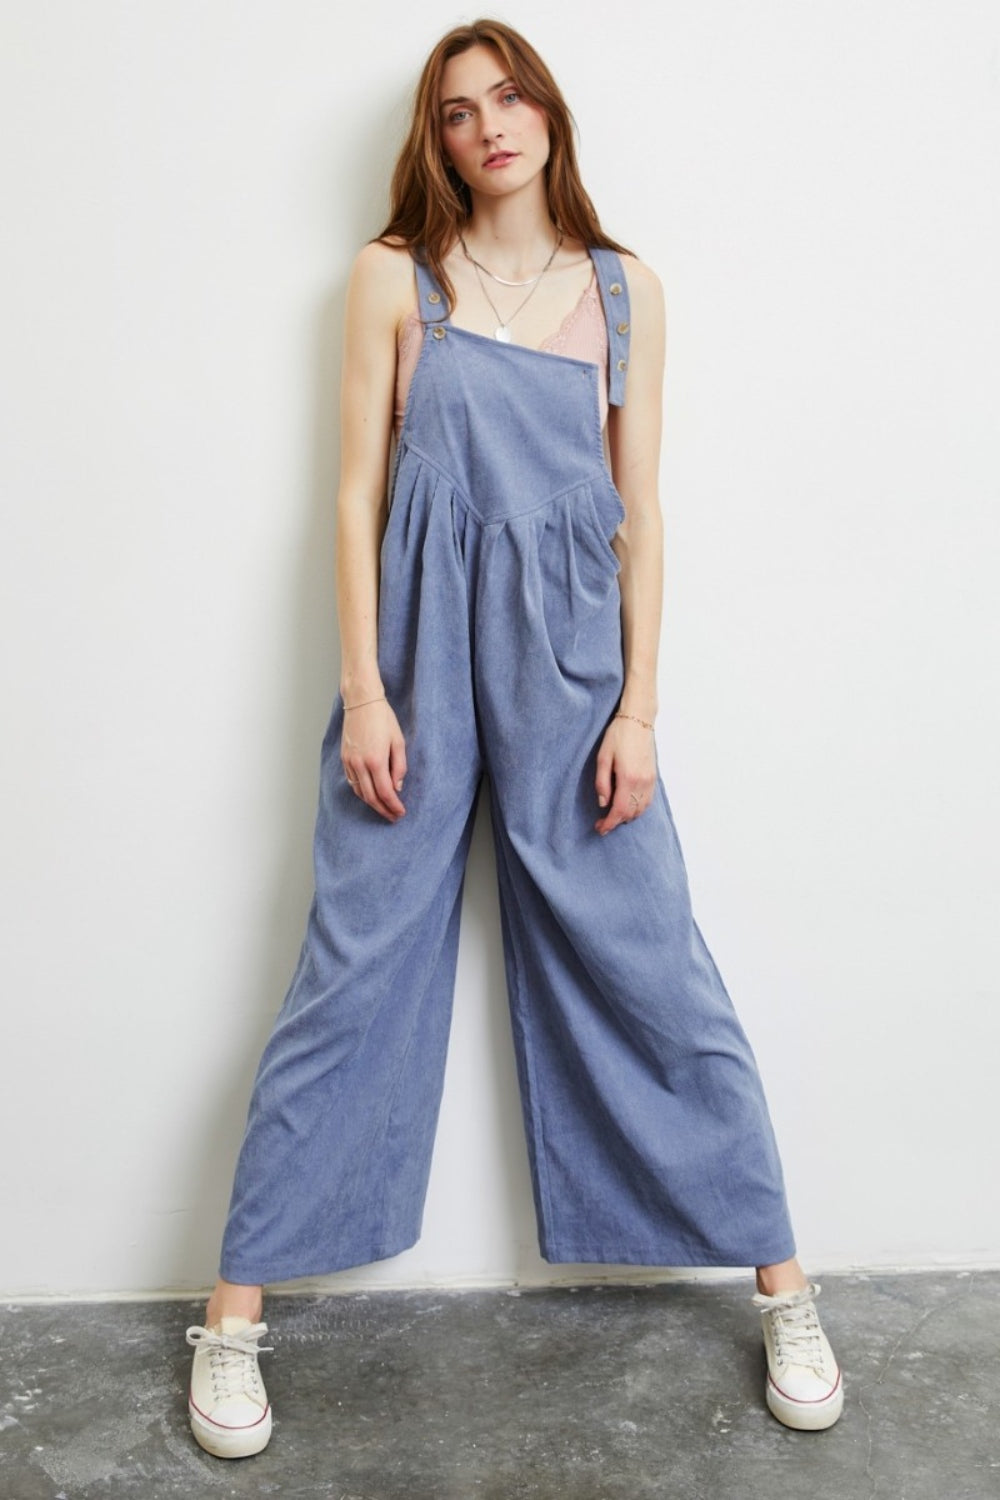 HEYSON Blue Flowy Wide Leg Pleated Overalls with Pockets